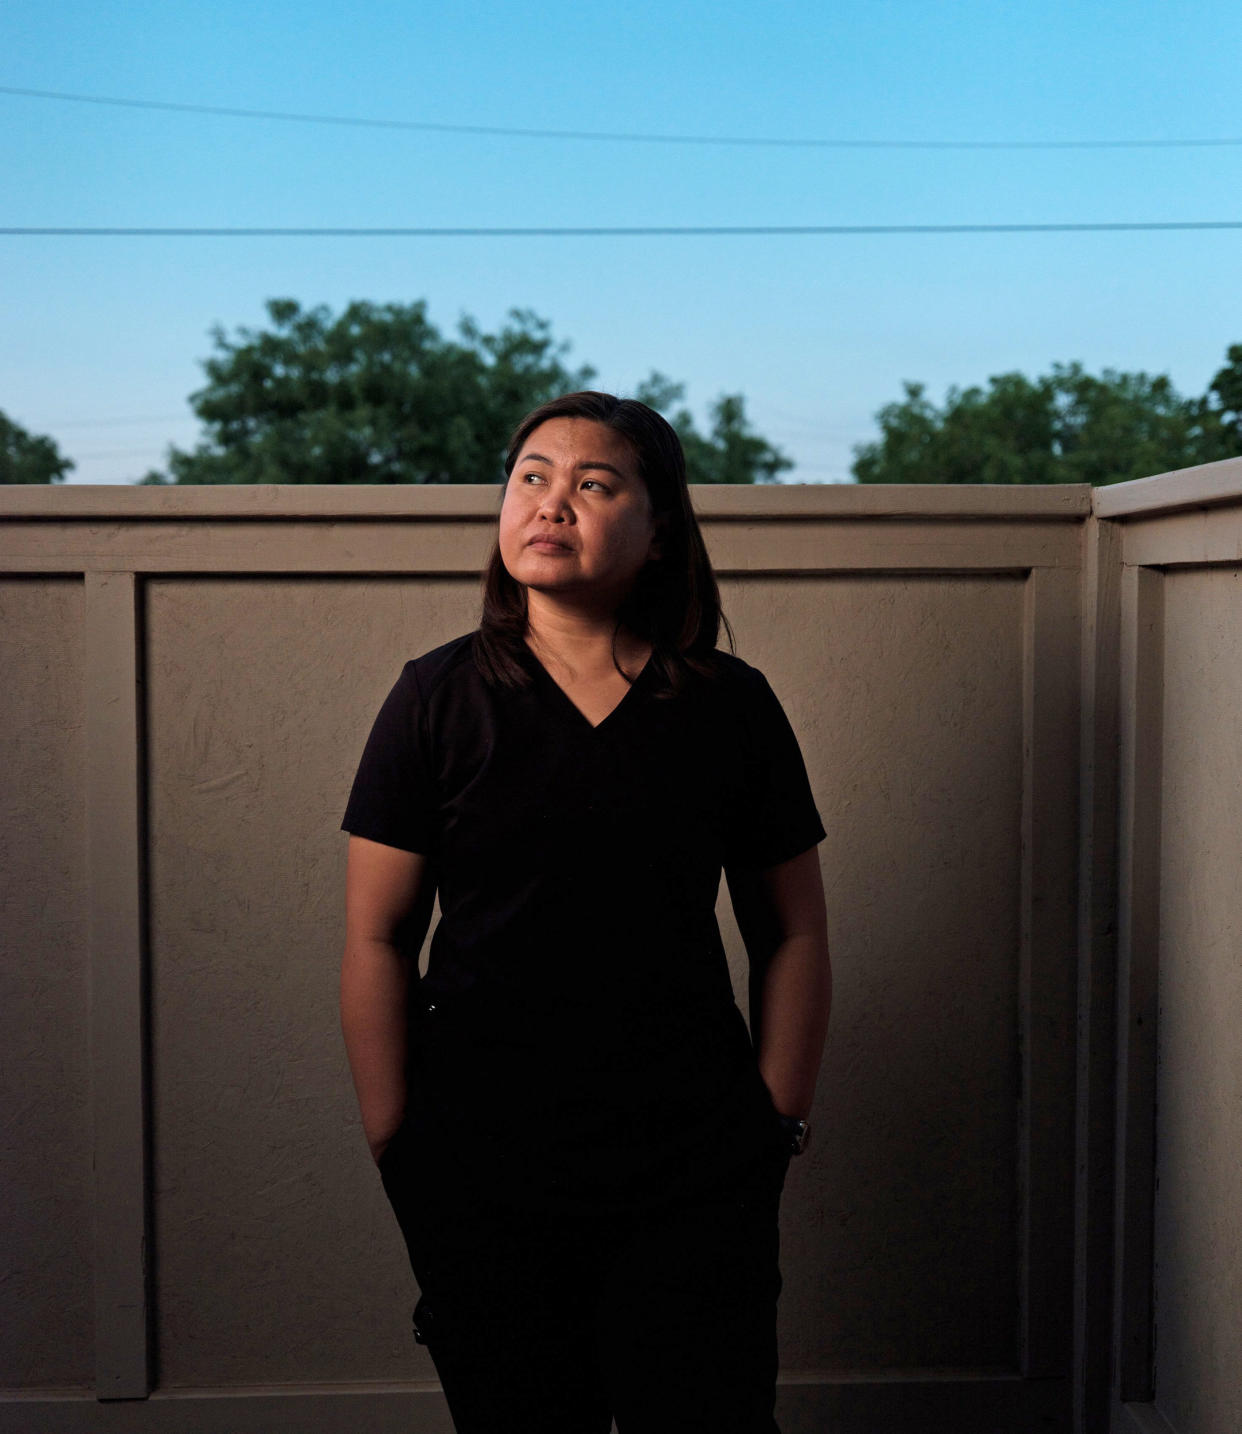 Ghel Pecjo is a physical therapist from the Philippines who now lives in Abilene, Texas. (Zerb Mellish for NBC News)